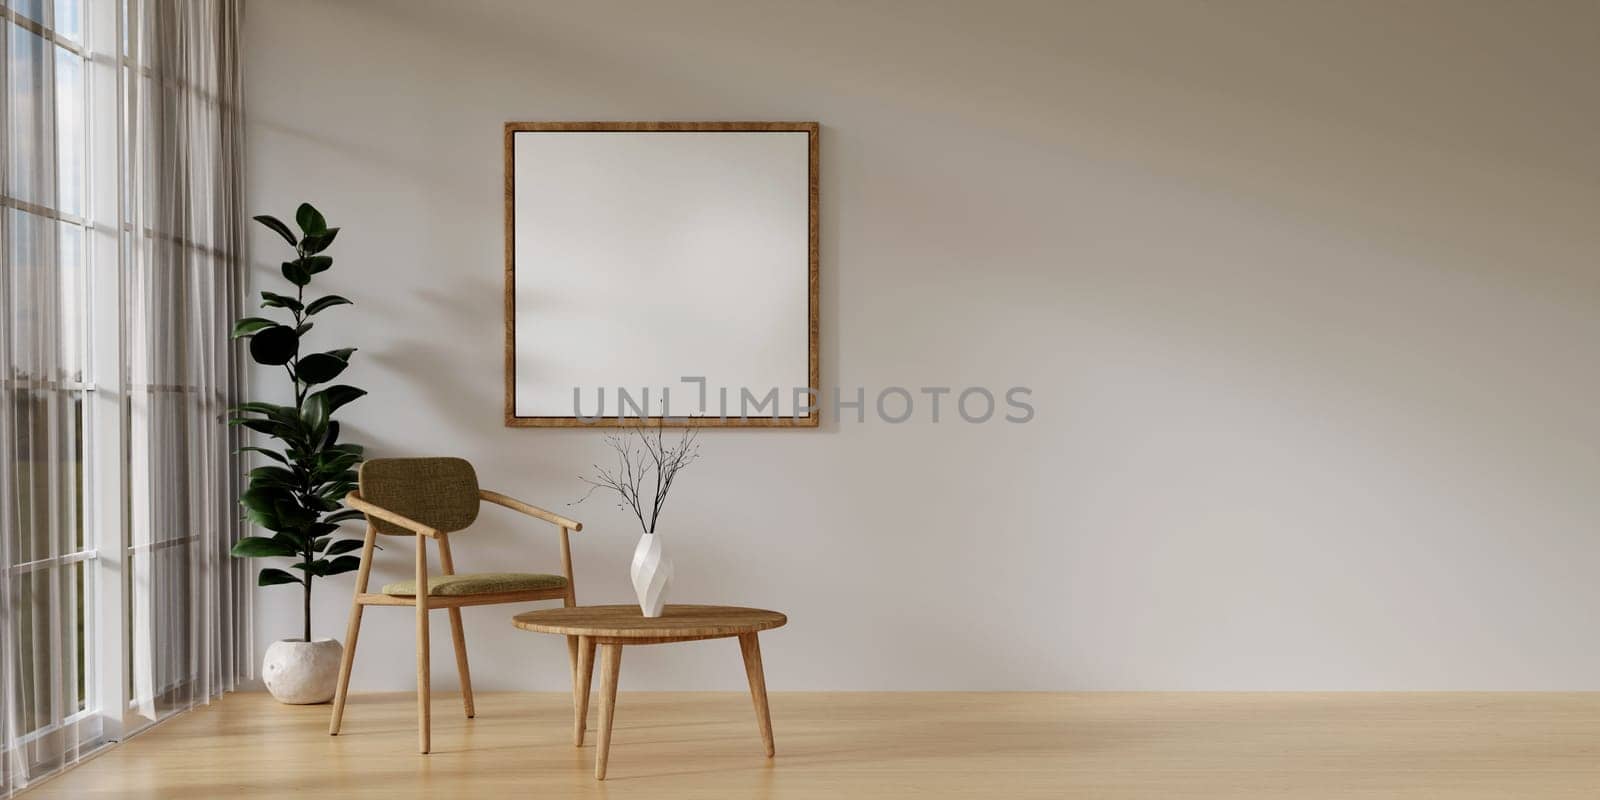 Blank vertical poster frame in Living room interior mockup. wooden table with coffee table and decoration on empty warm neutral wall background. 3d rendering, illustration.